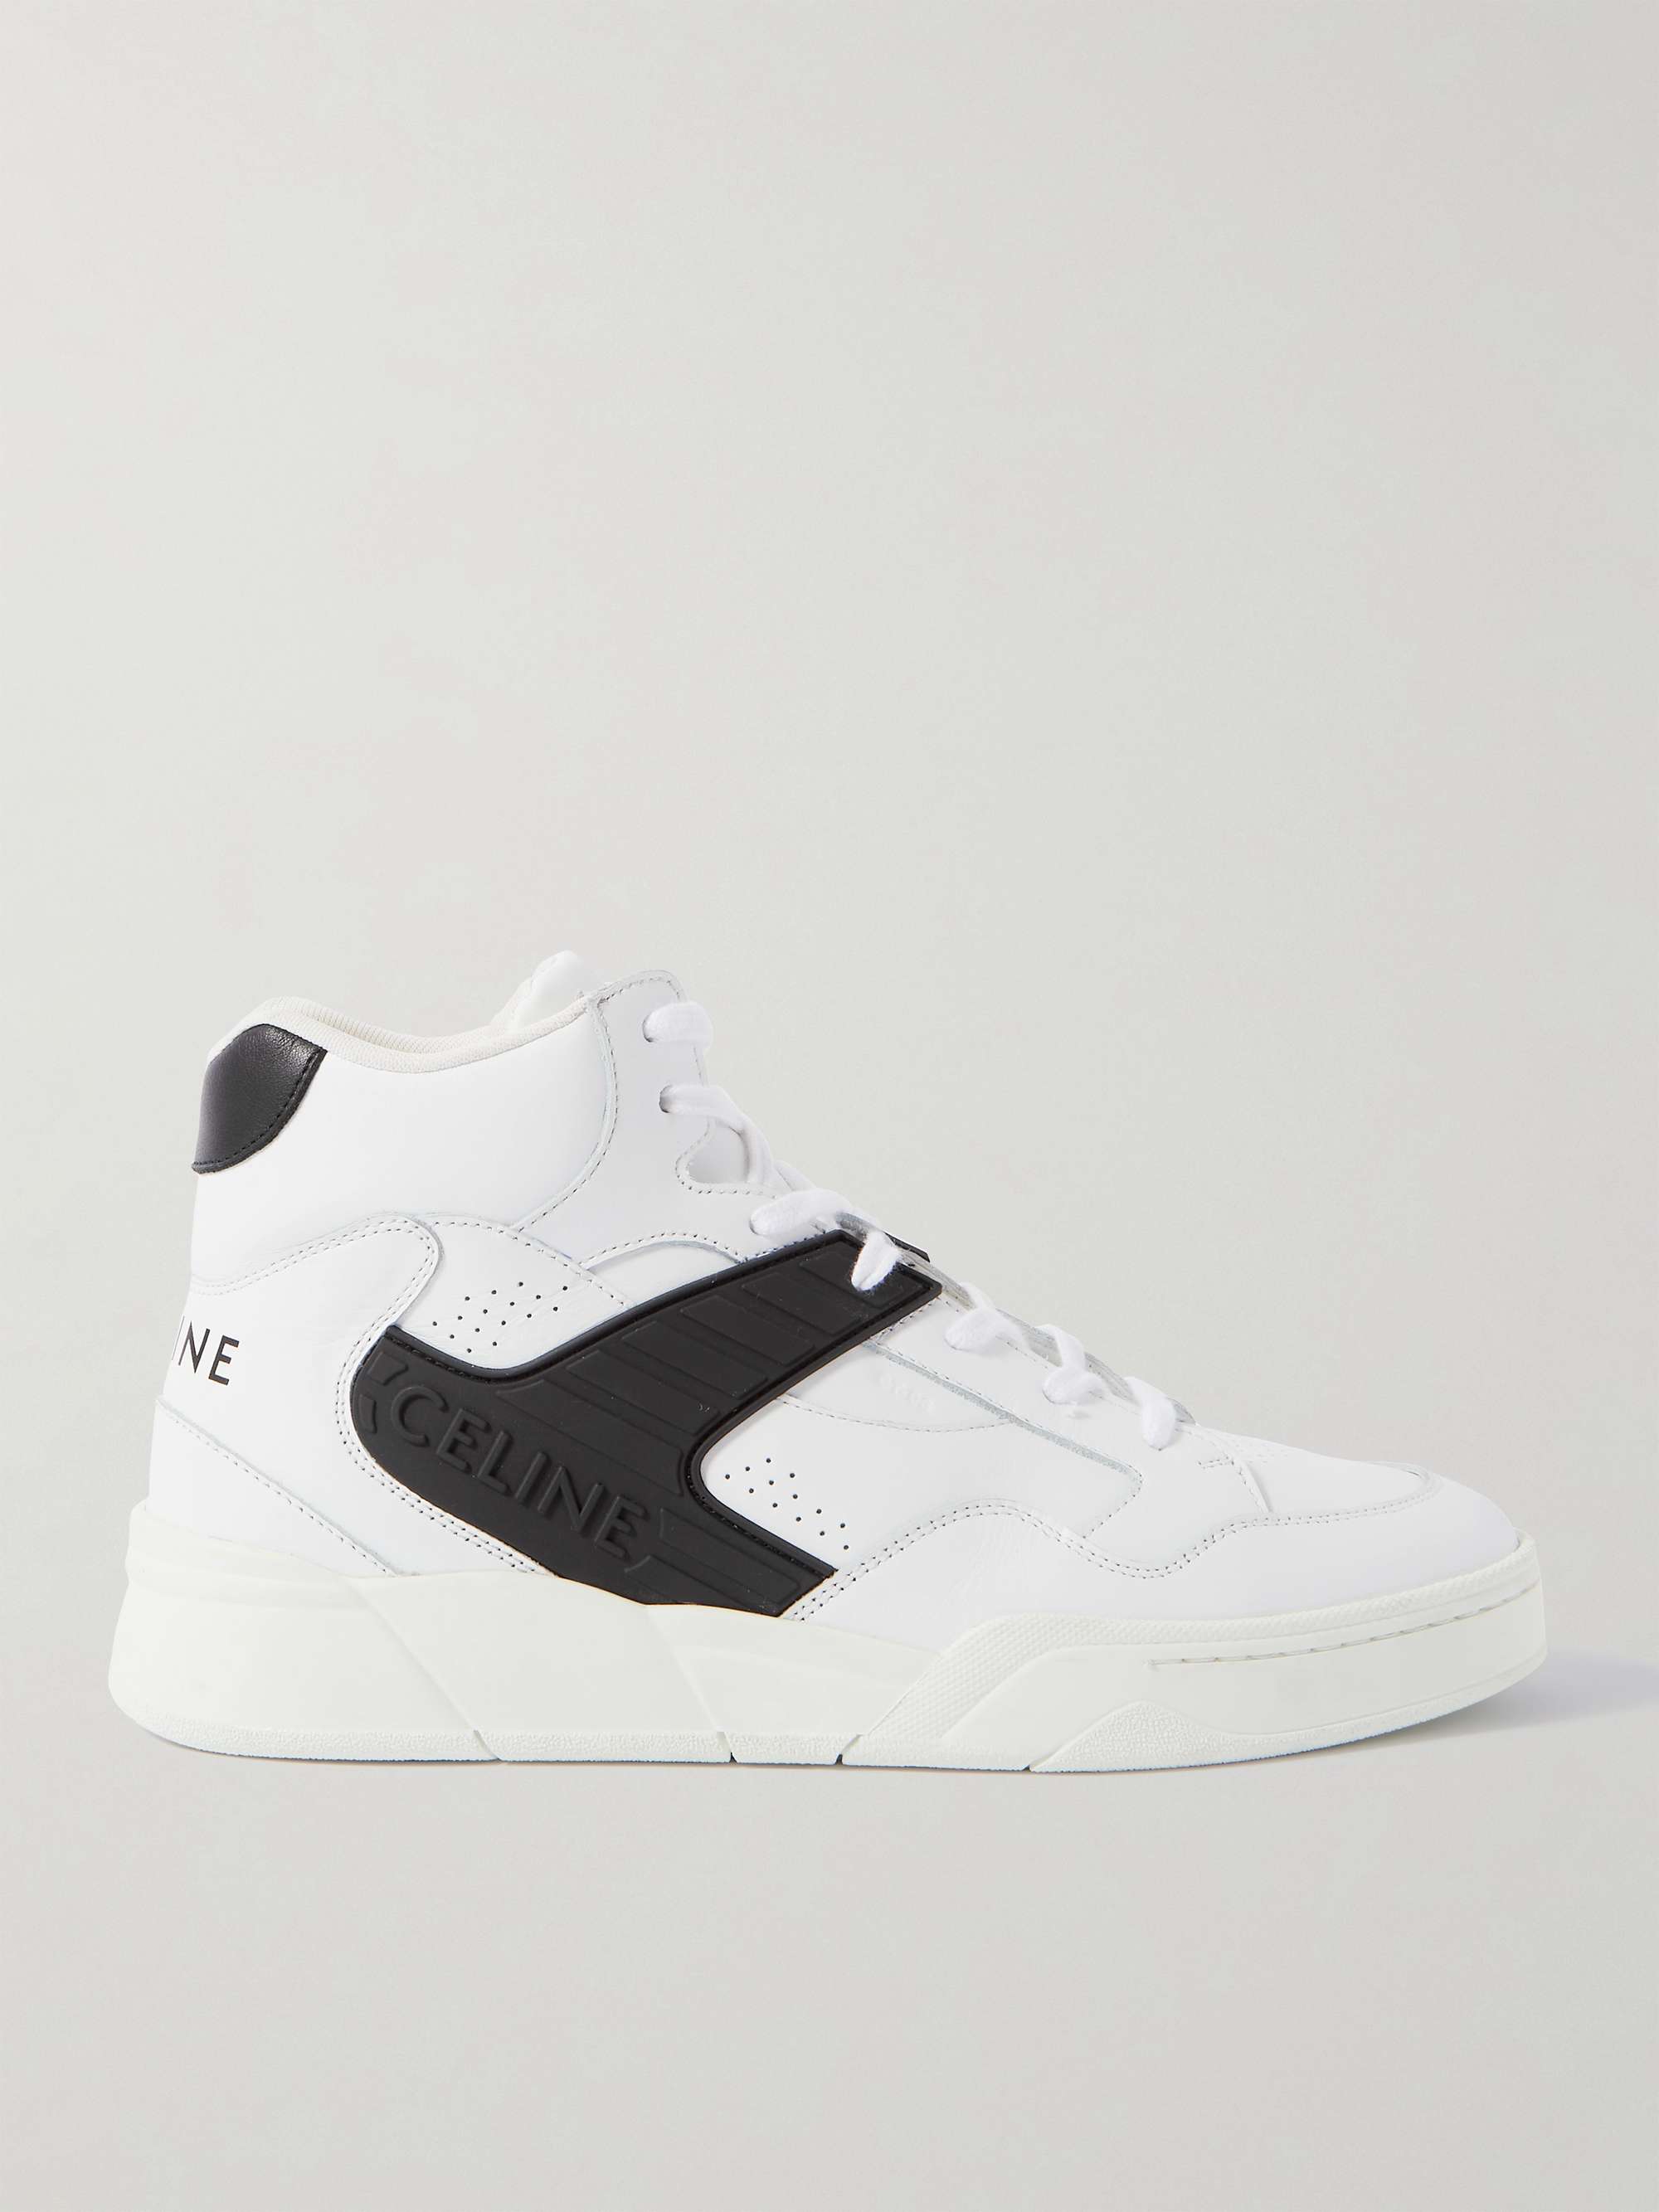 CELINE HOMME CT-06 Rubber-Trimmed Leather High-Top Sneakers